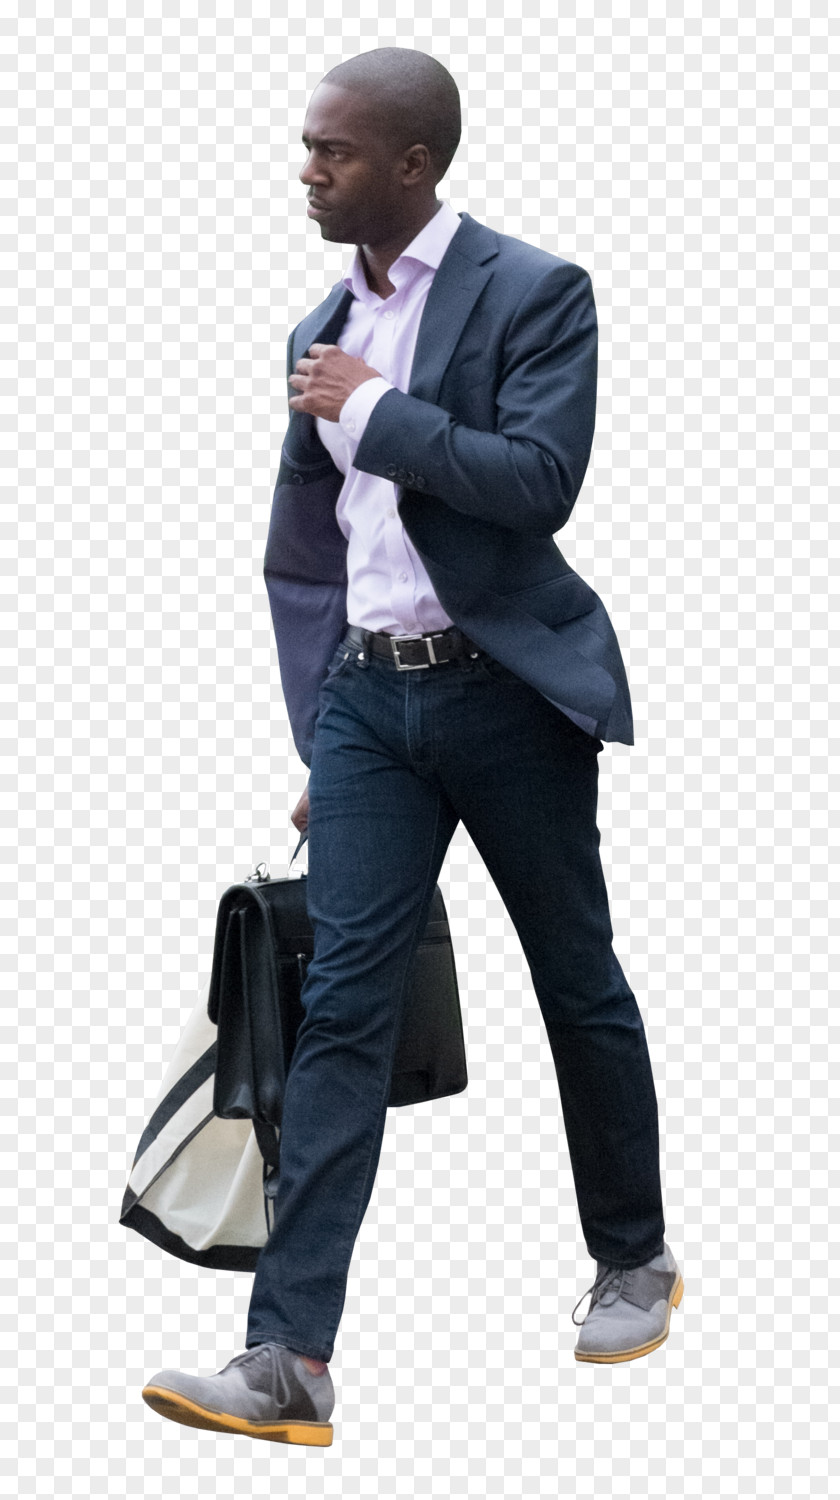 Business People Businessperson Walking Suit PNG